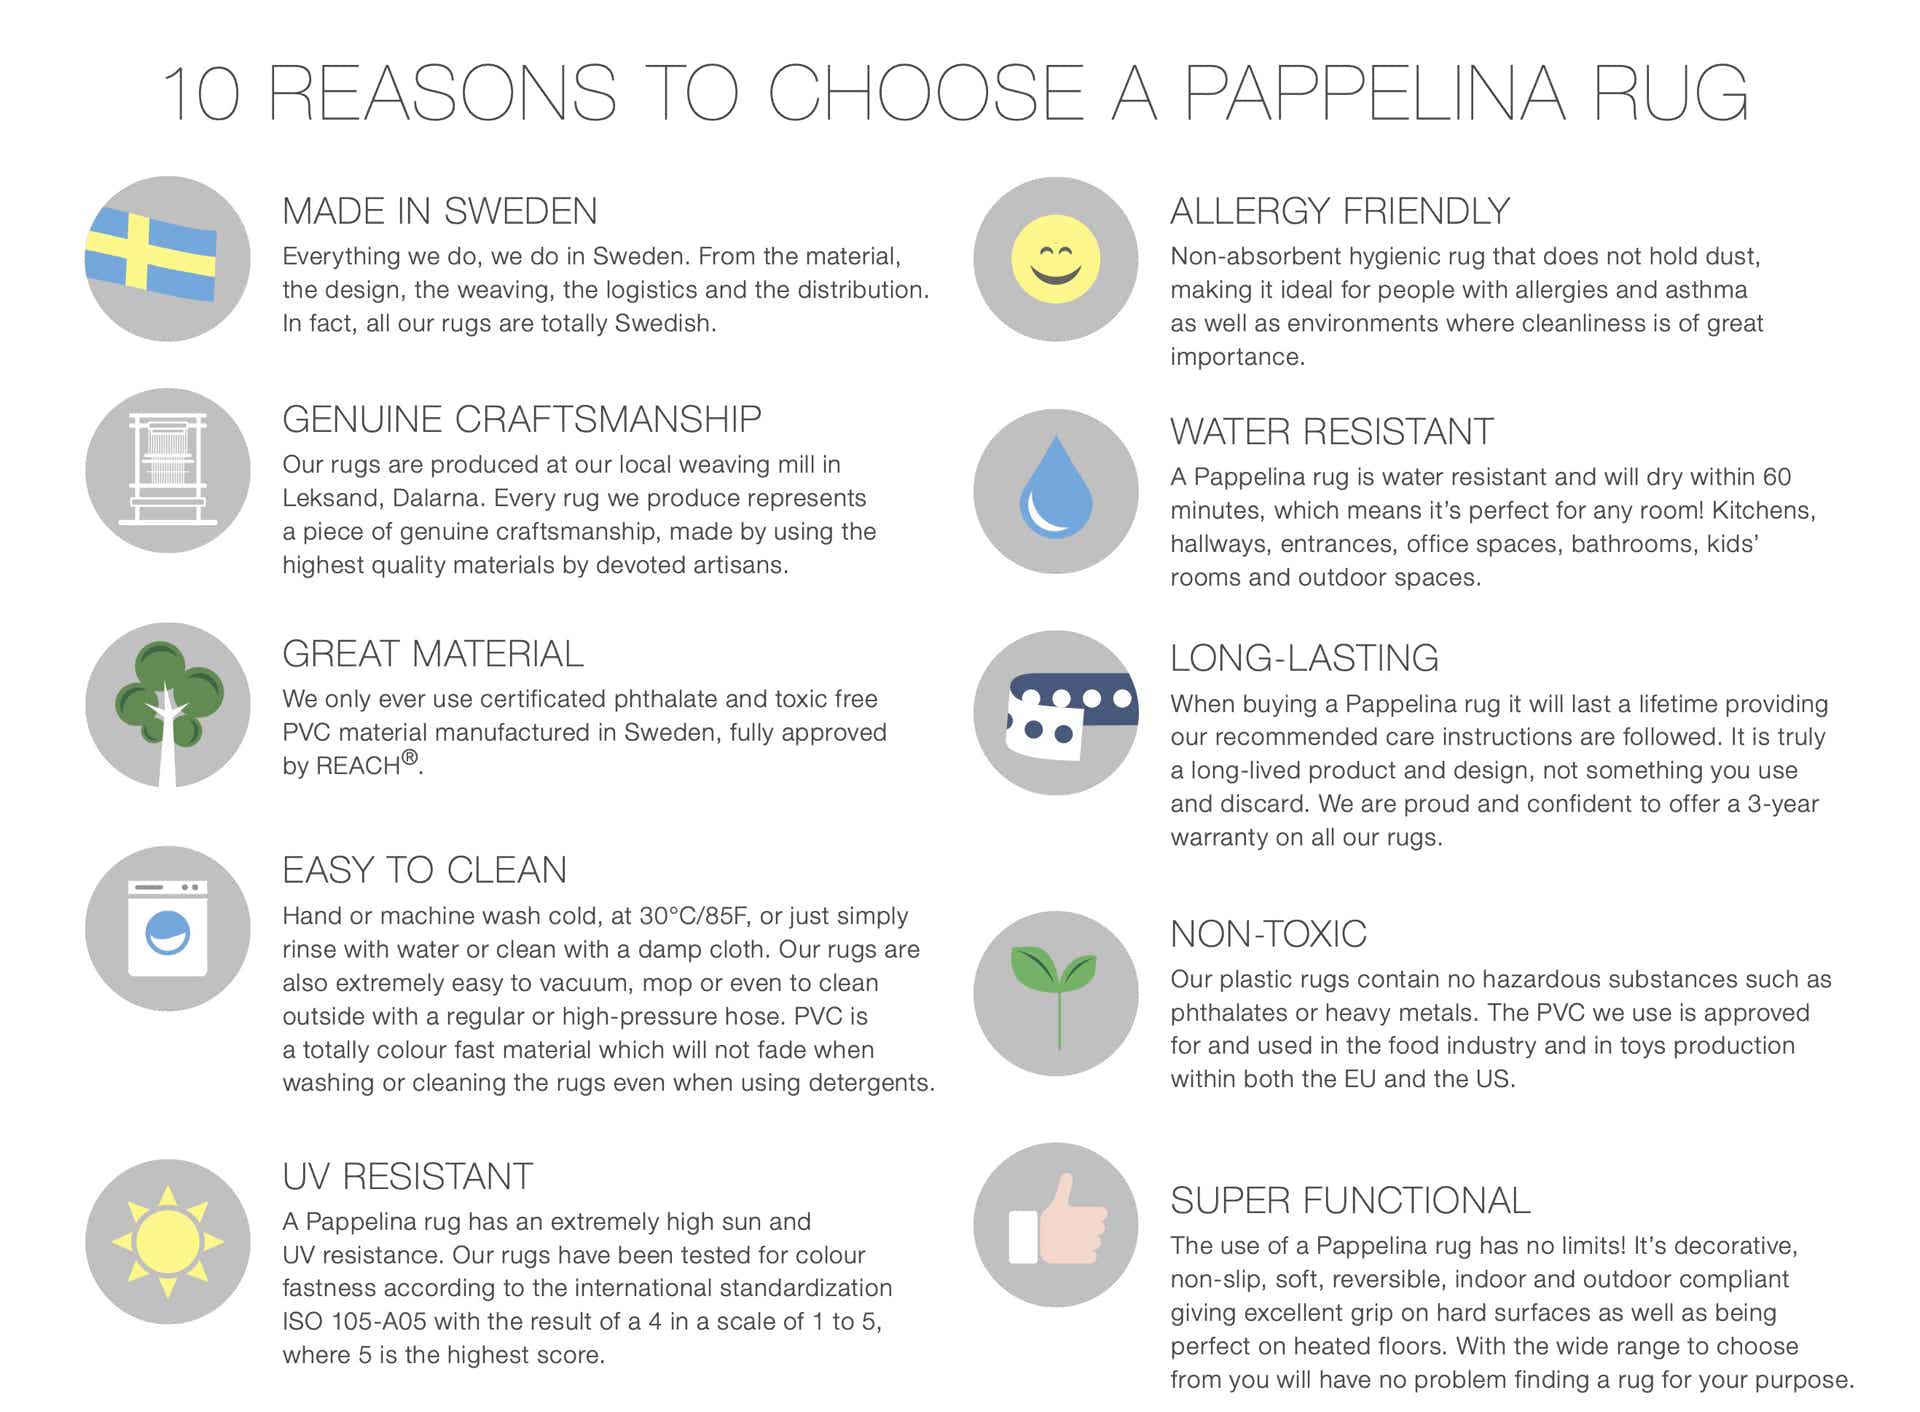 10 reasons to choose a pappelina rug